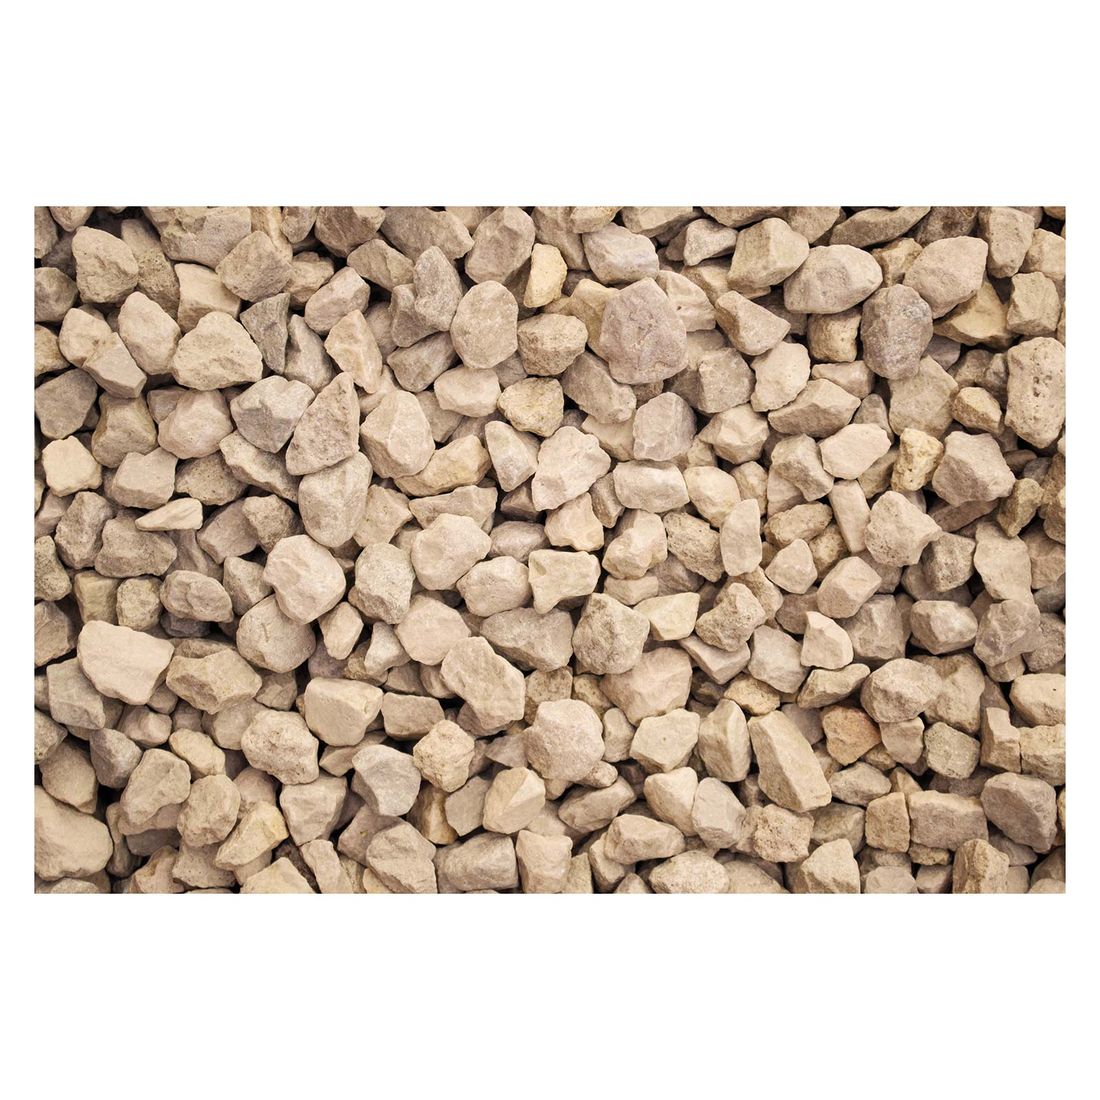 Cotswold Chippings 20Kg Maxi Bag 10-20Mm